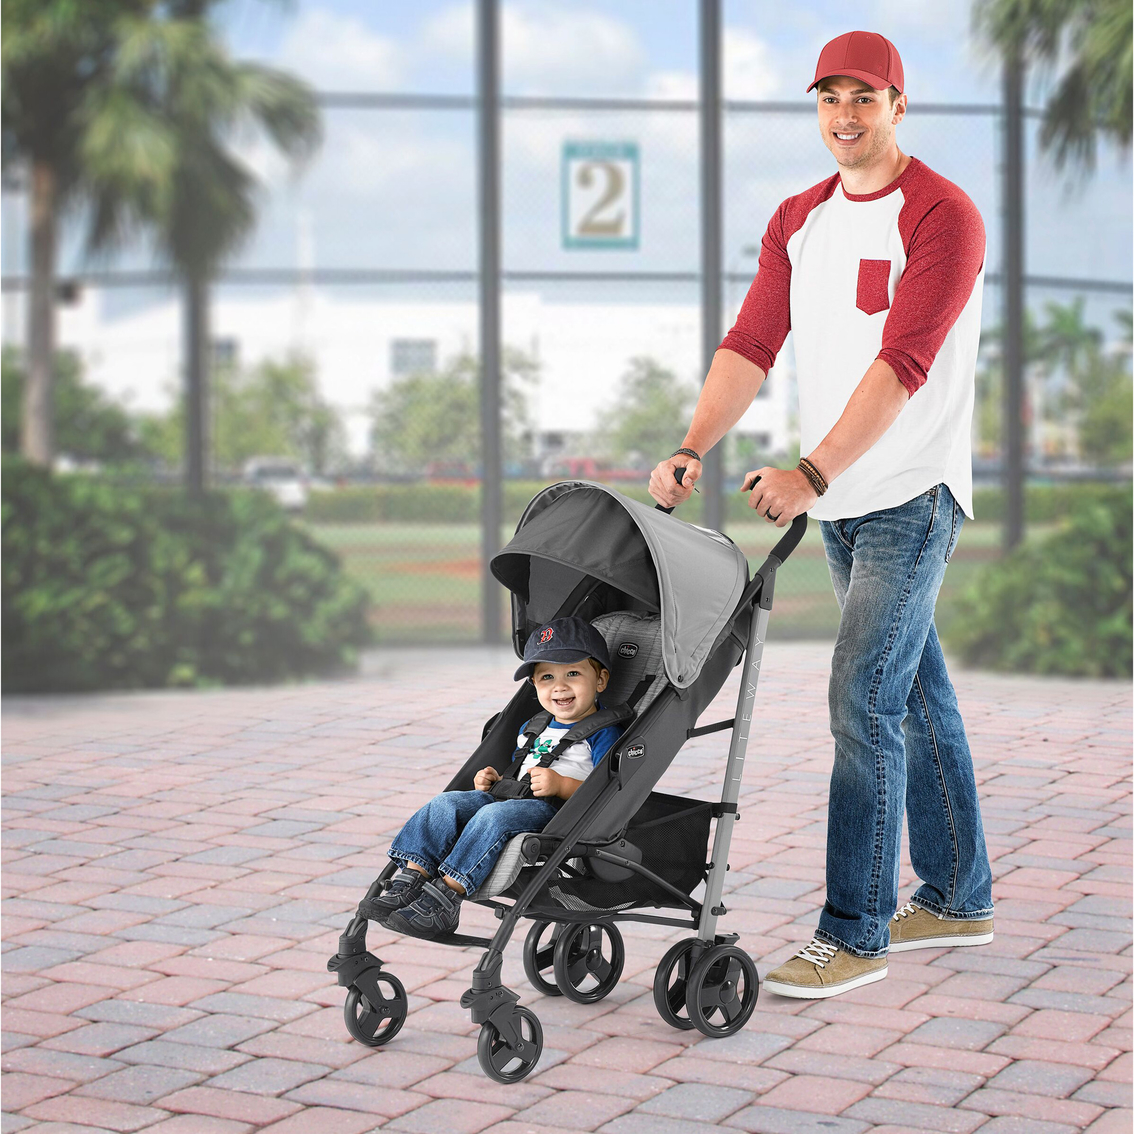 Chicco Liteway Stroller - Image 2 of 5